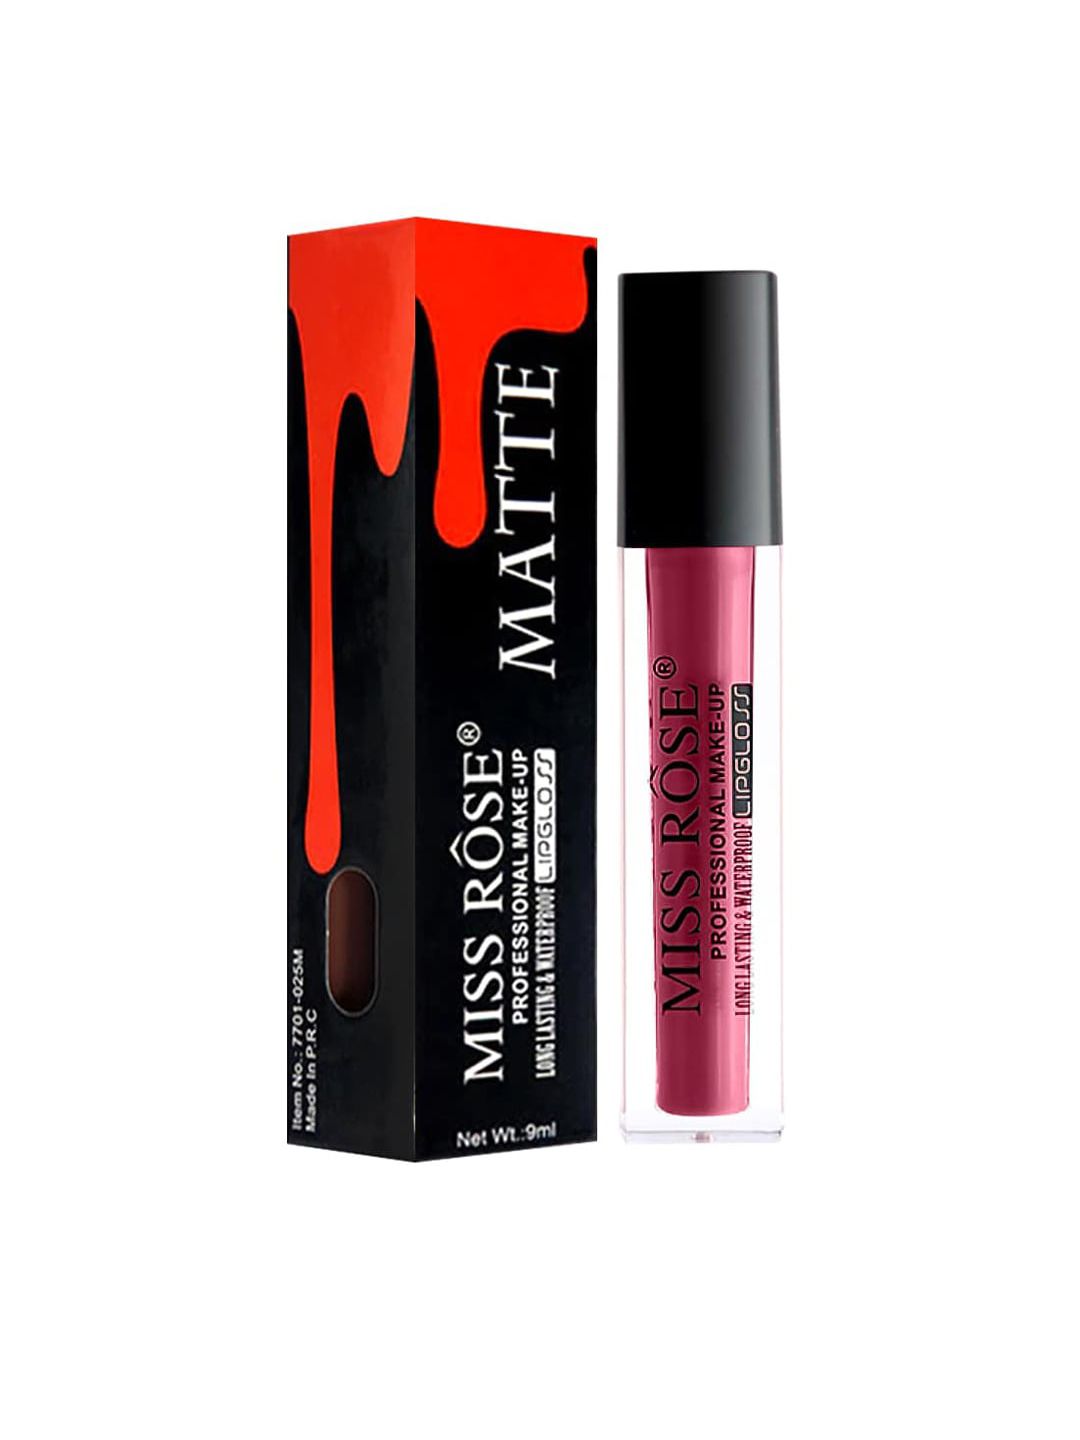 MISS ROSE Shiny Liquid LipGloss 7701-020 05 20 gm Price in India